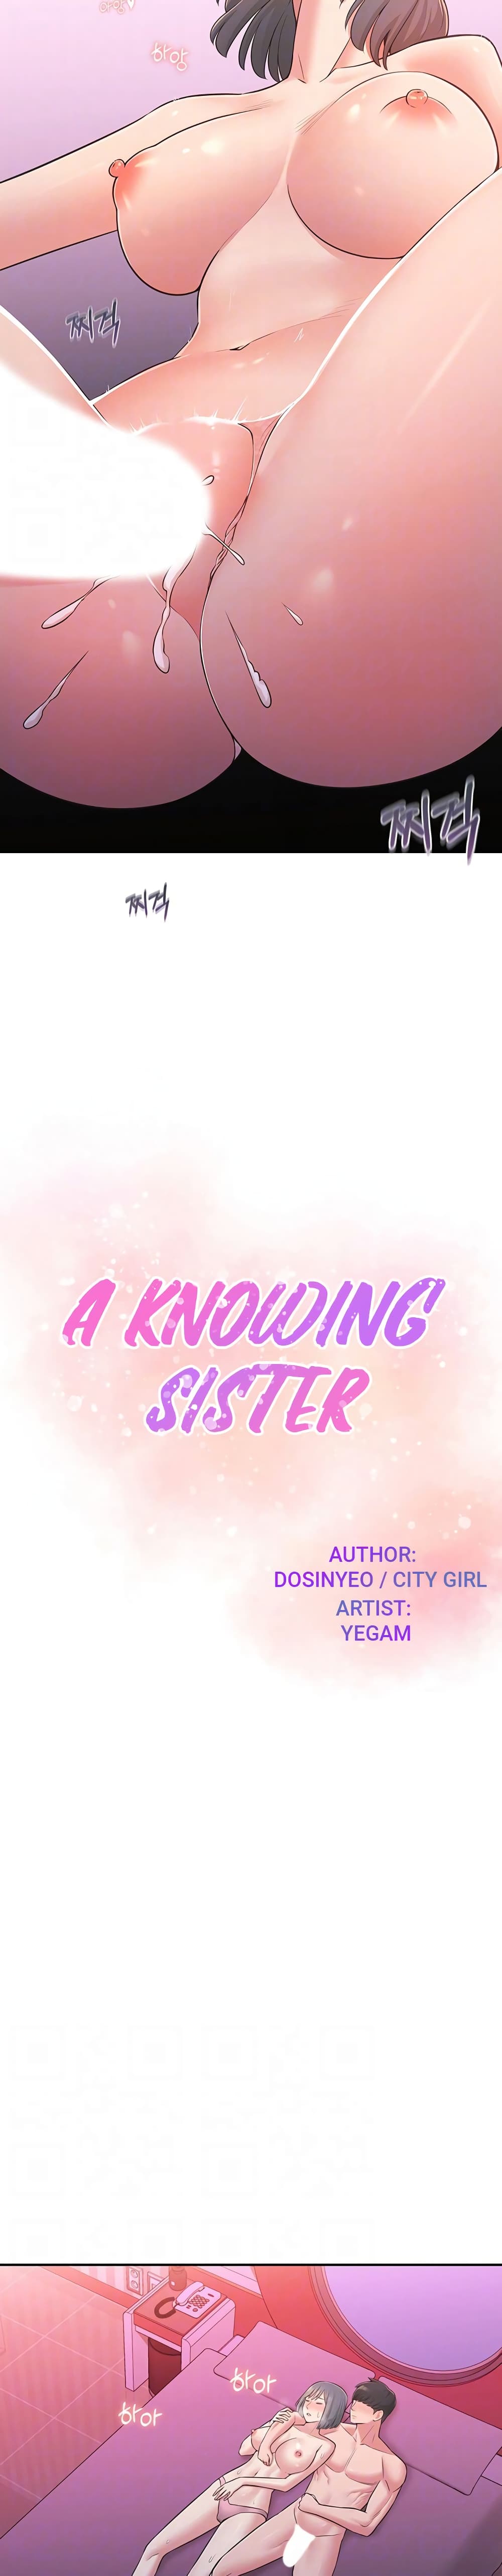 A Knowing Sister 26-26